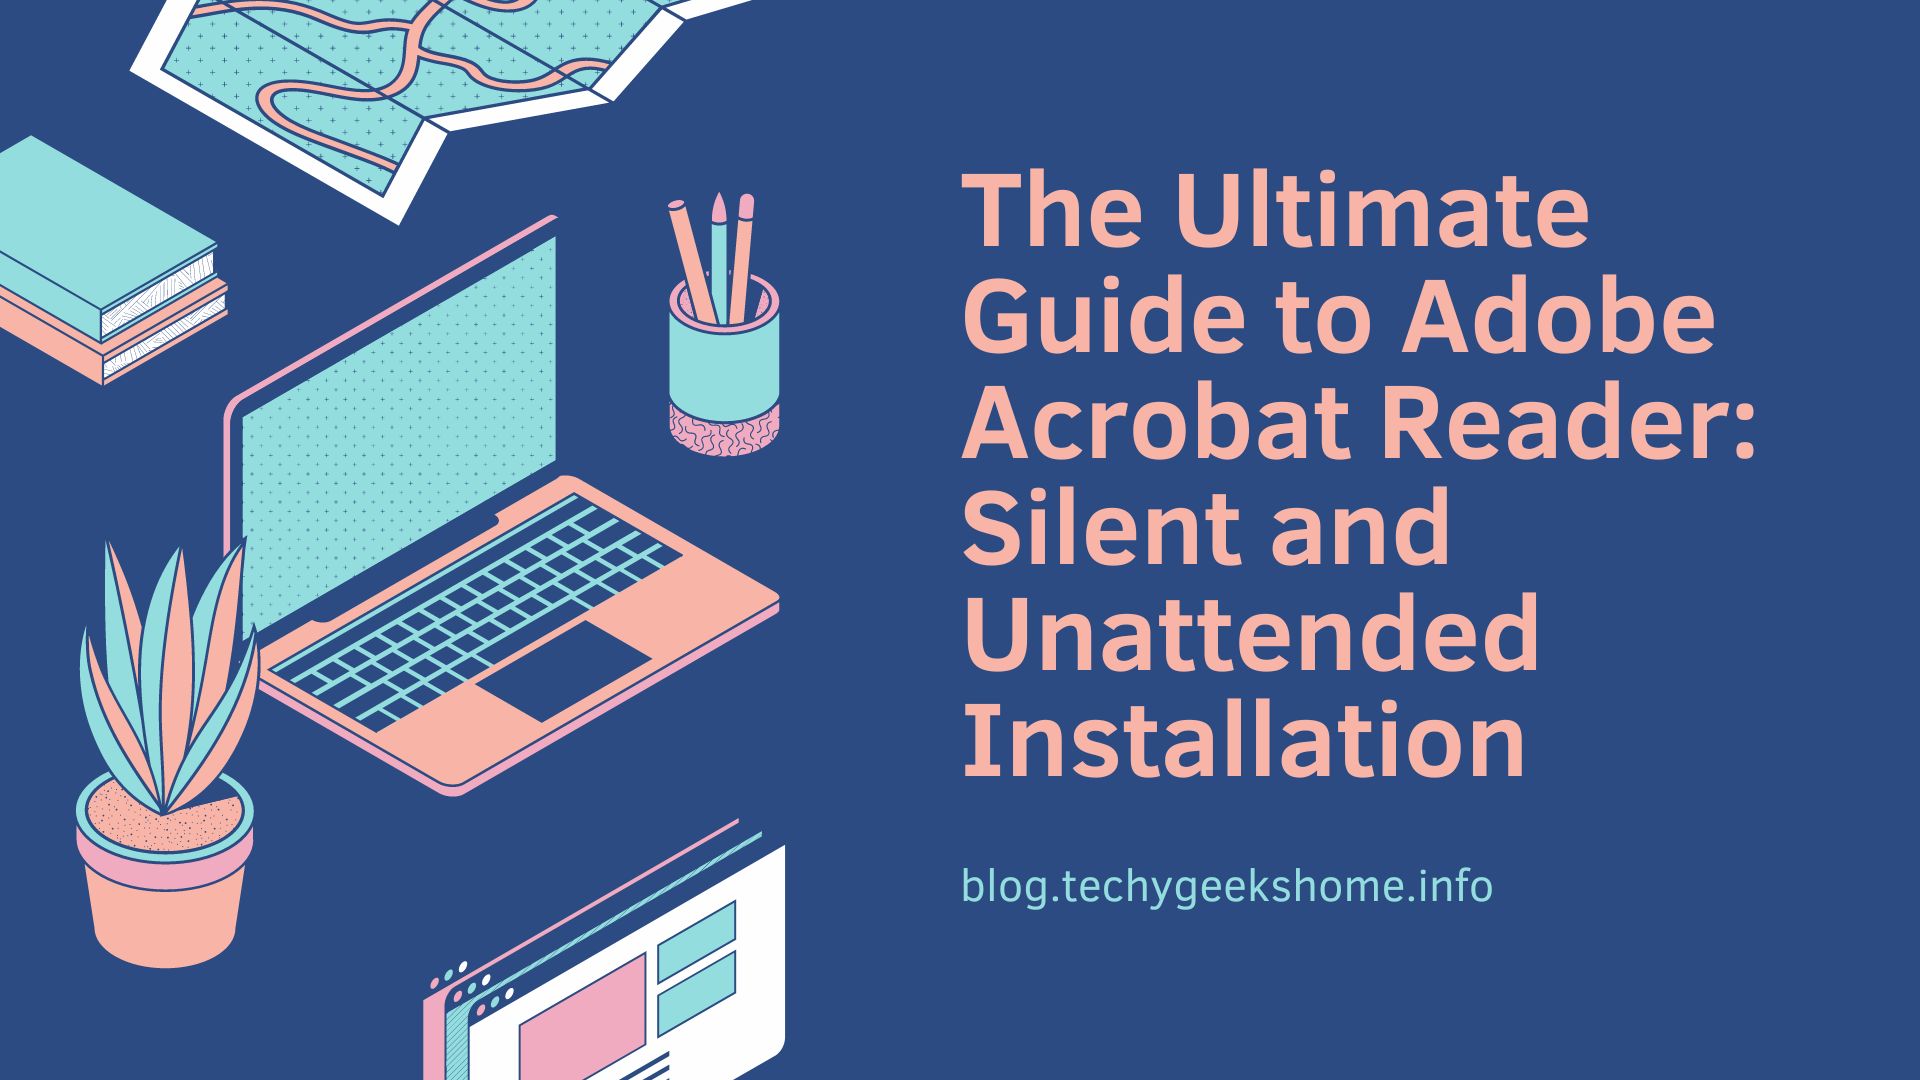 The Ultimate Guide to Adobe Acrobat Reader: Silent and Unattended Installation